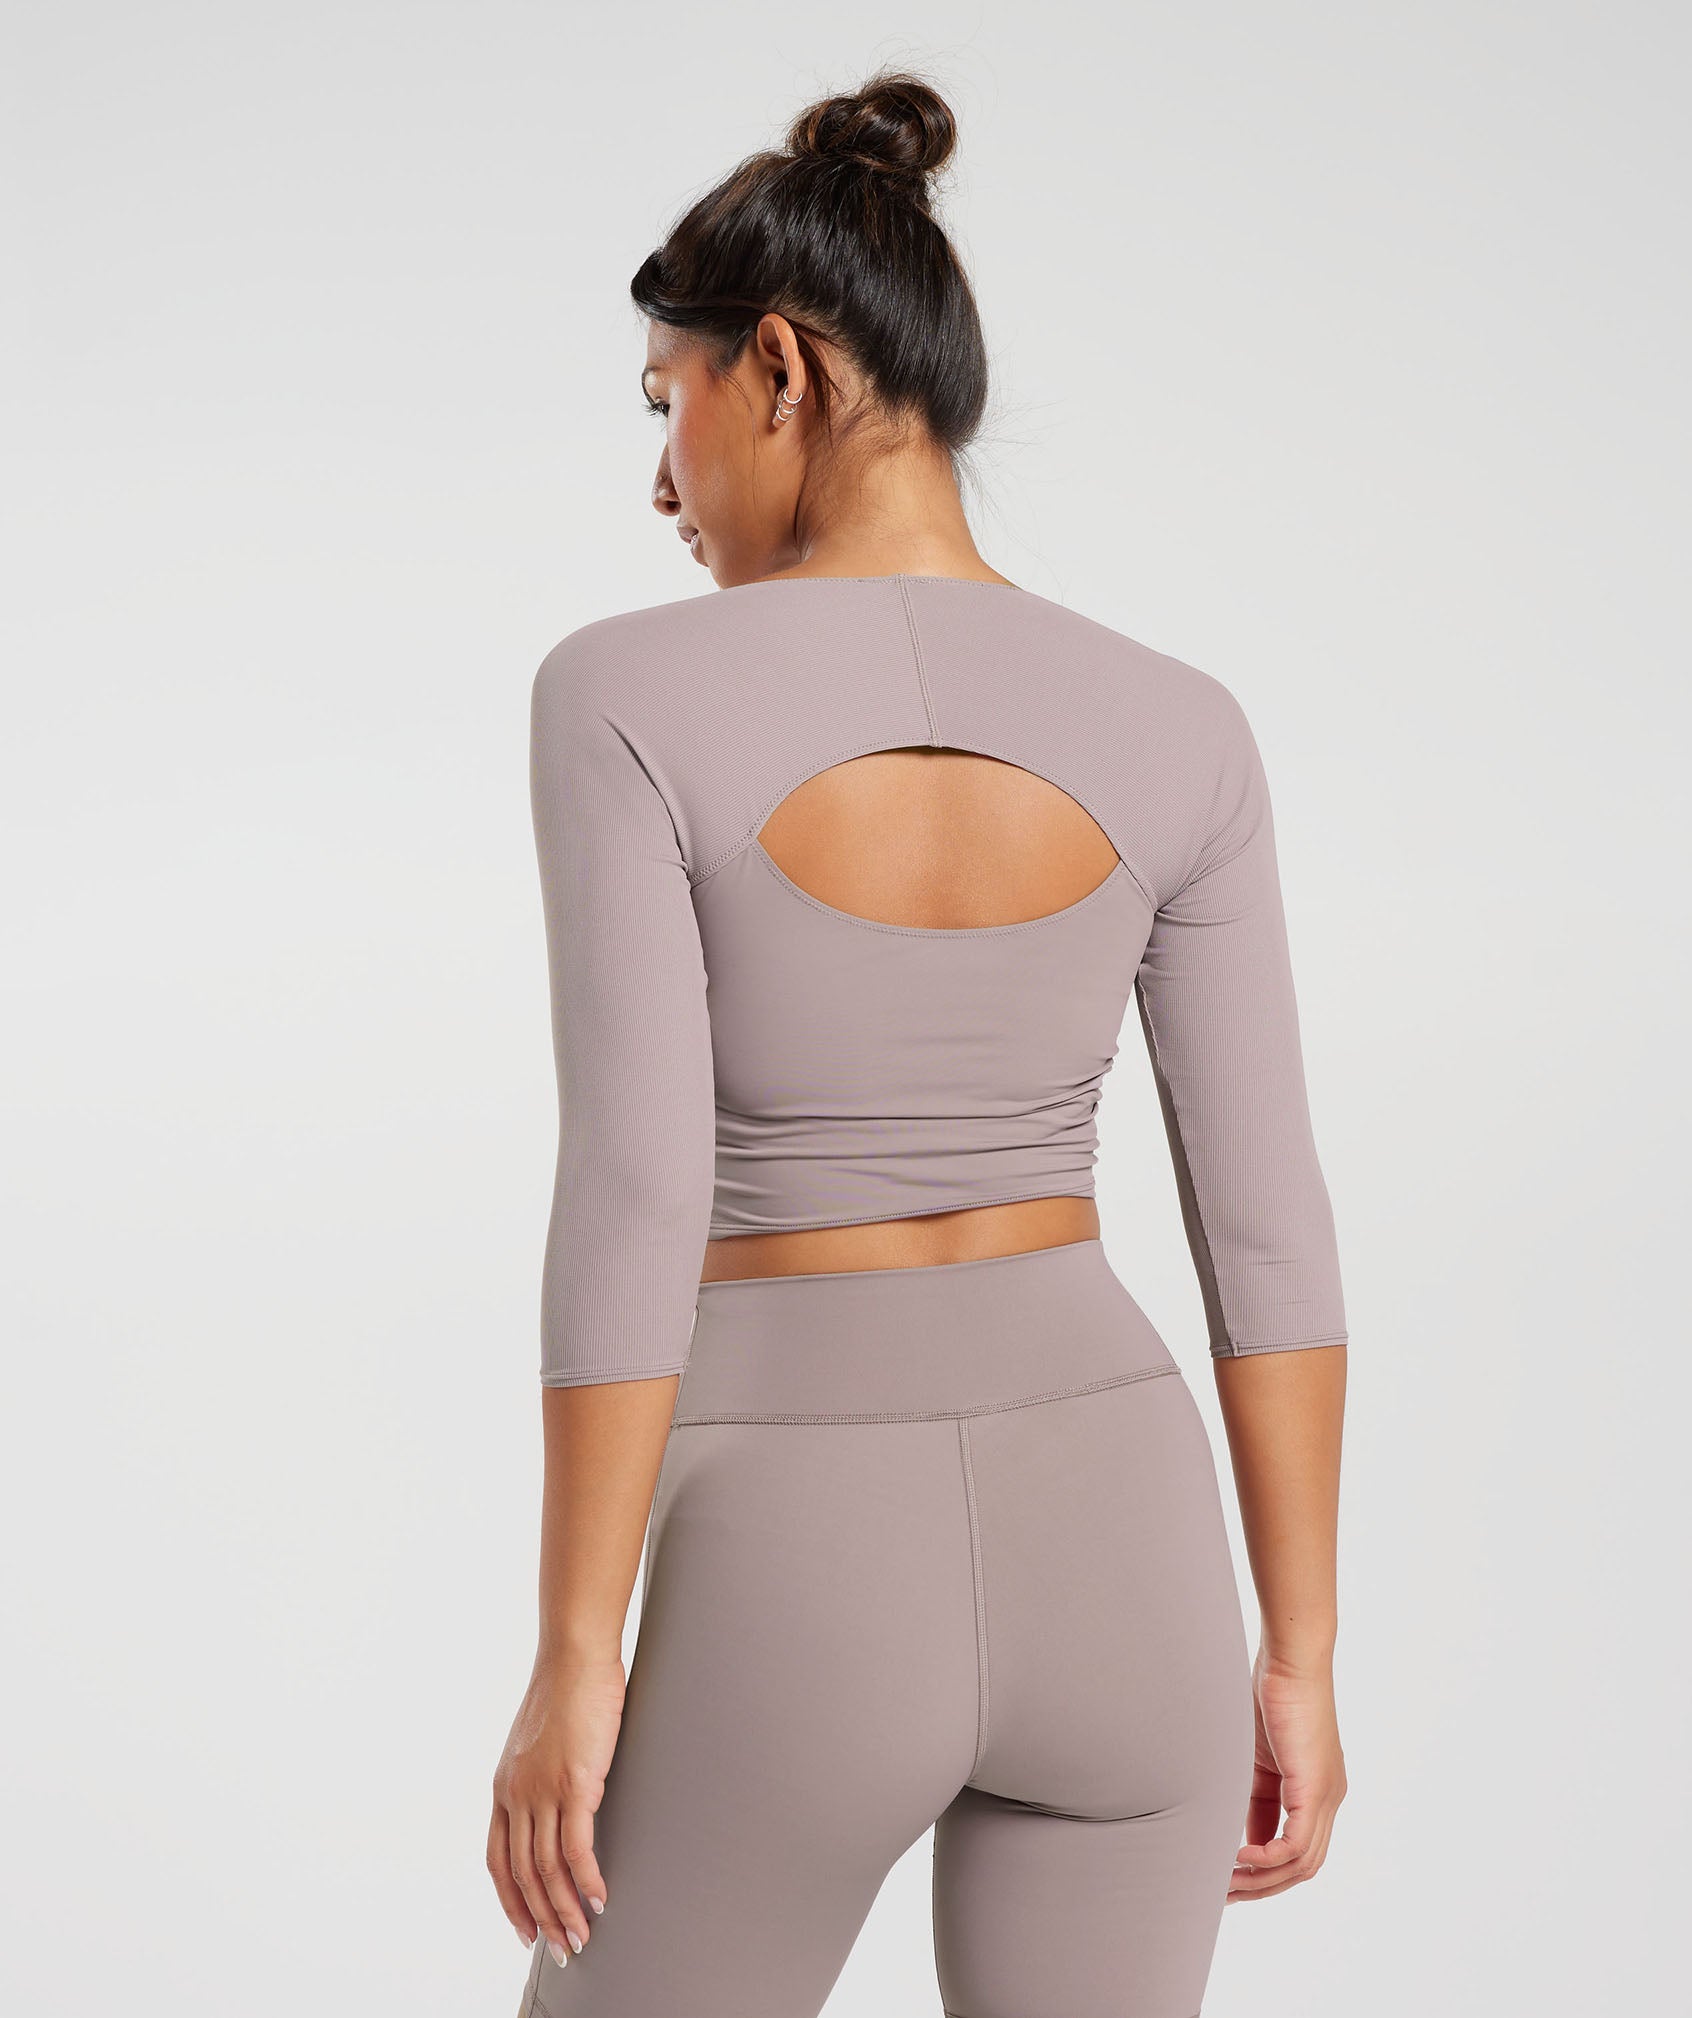 Elevate 3/4 Sleeve Crop Top in Washed Mauve - view 2